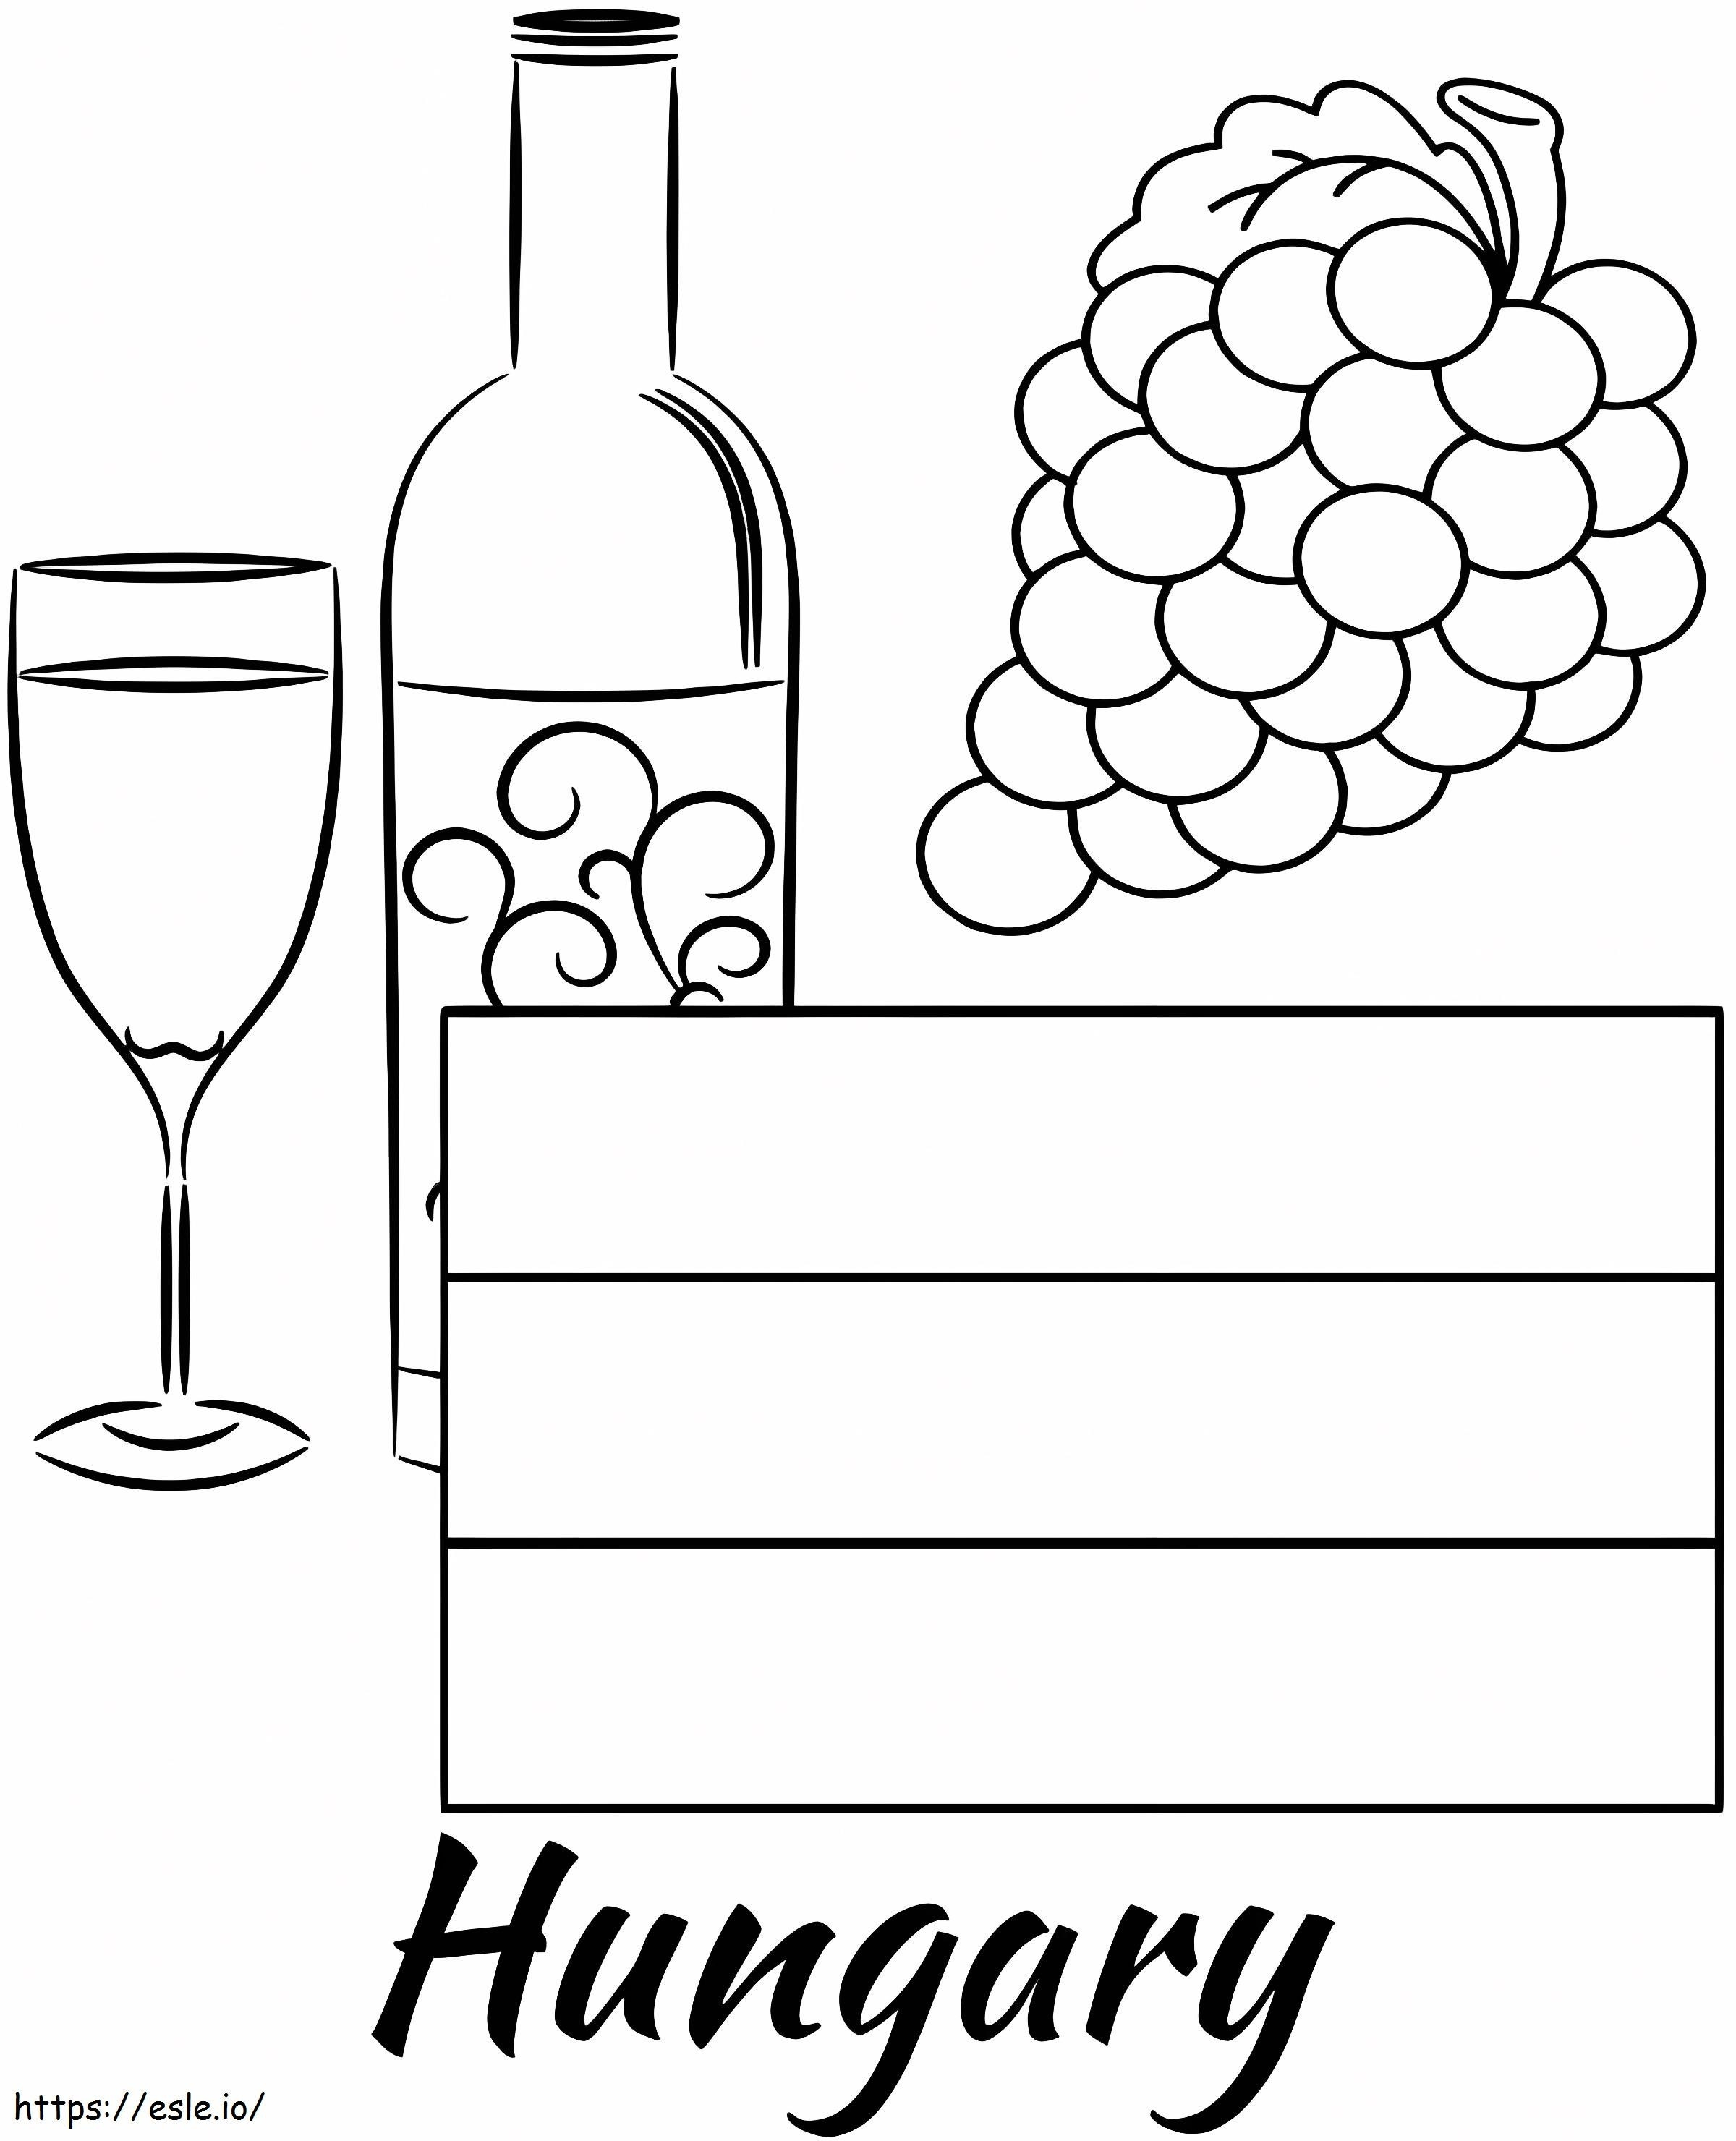 Hungary 1 coloring page